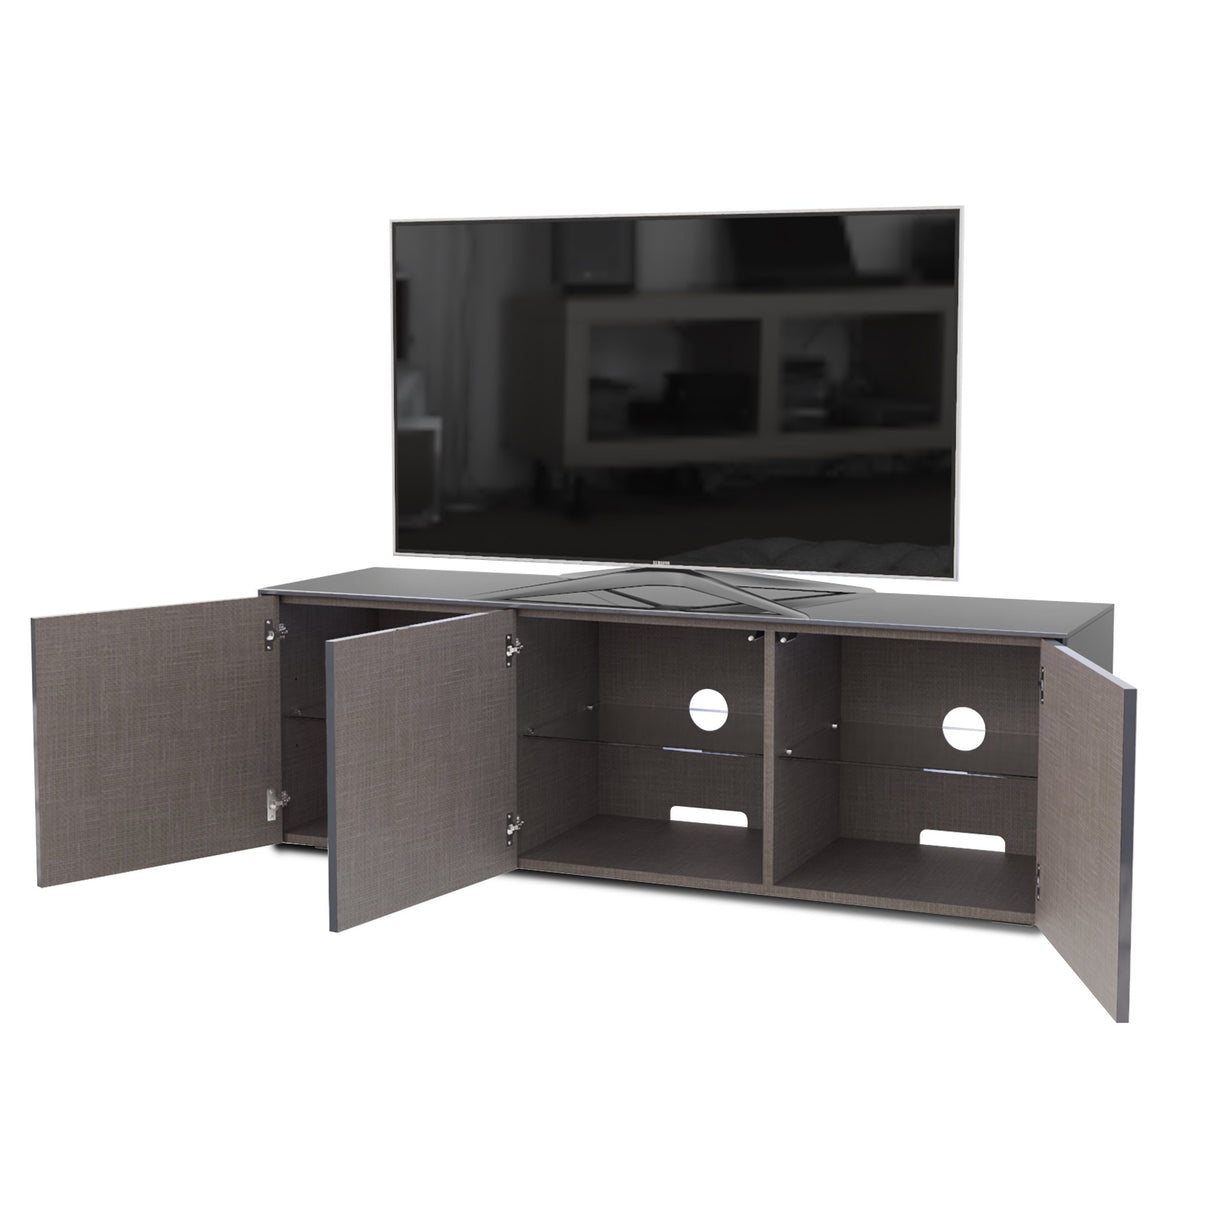 Frank Olsen High Gloss Grey 1500mm TV Cabinet with LED Lighting and Wireless Phone Charging